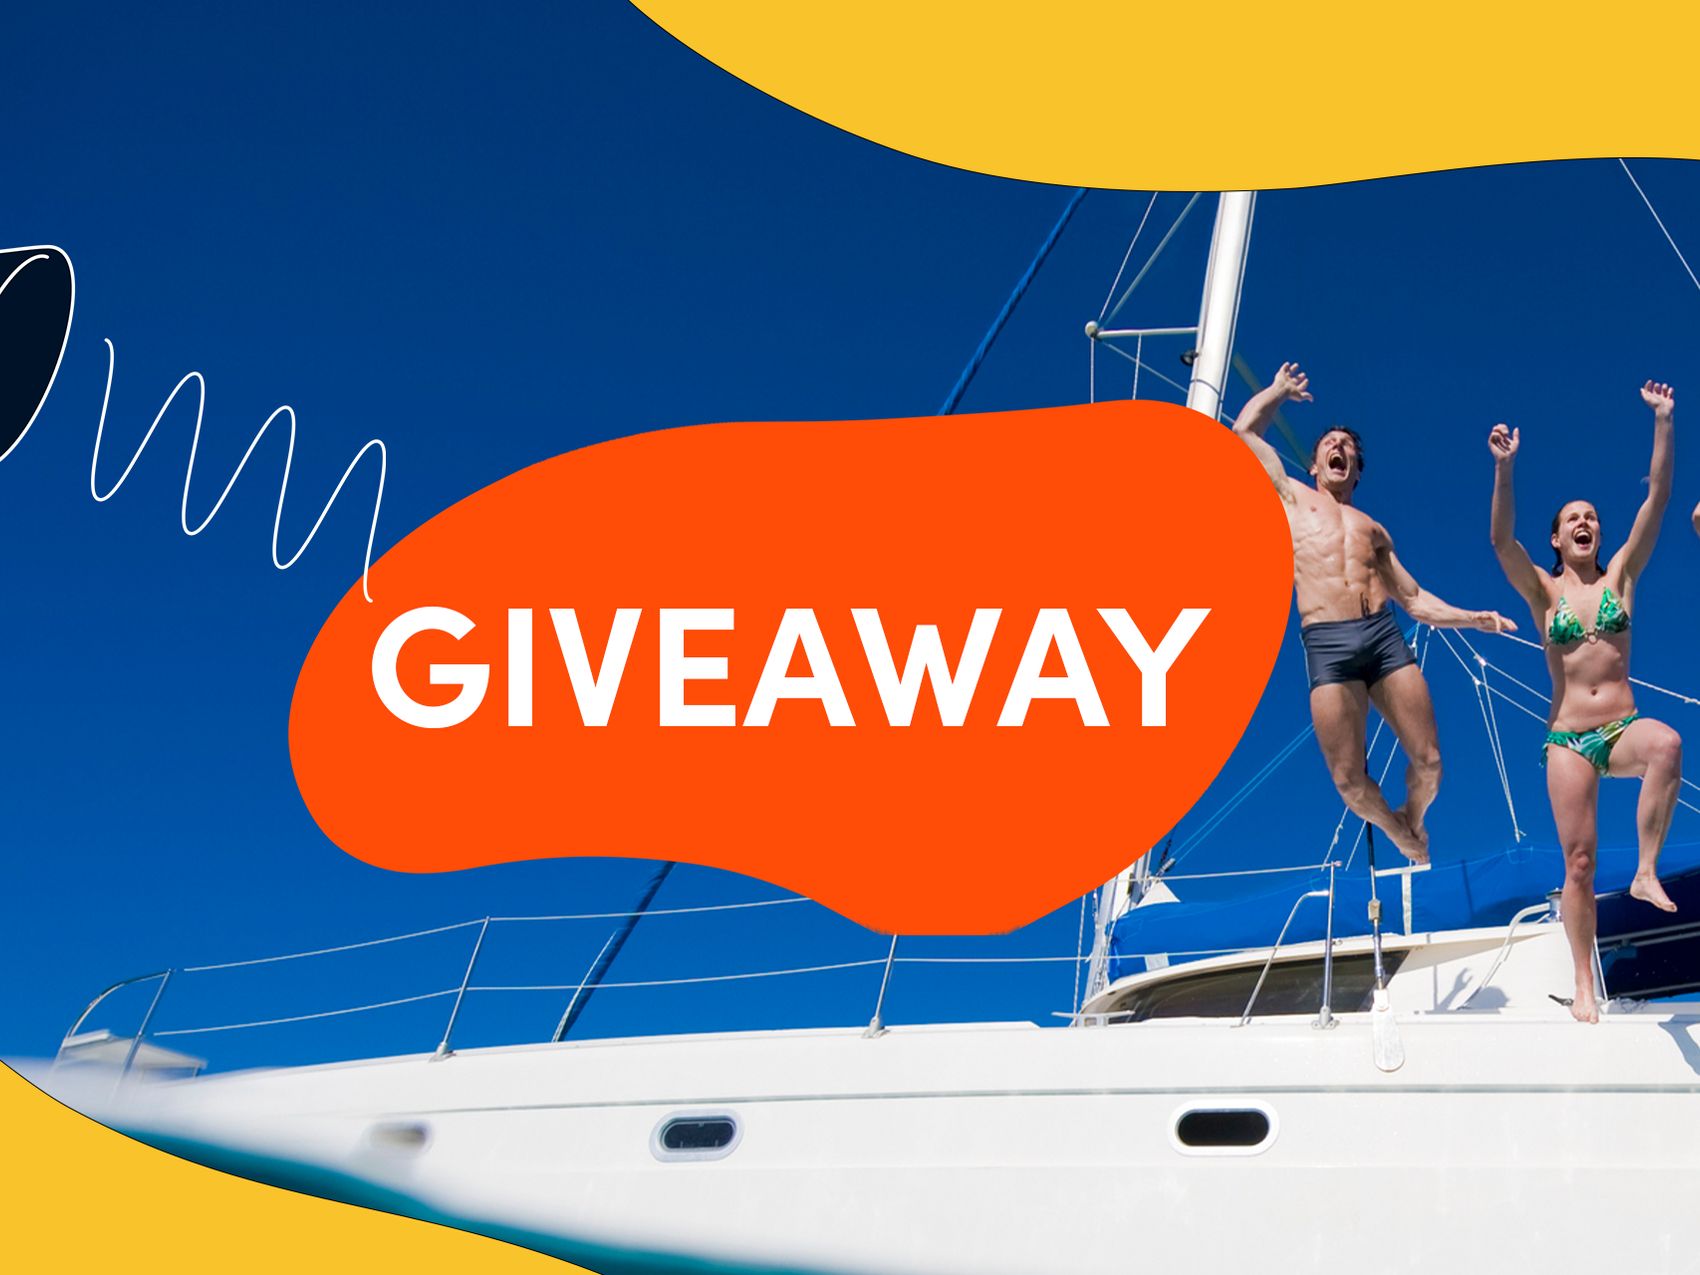 The Yacht Giveaway is here! Win a weeklong sailing holiday!